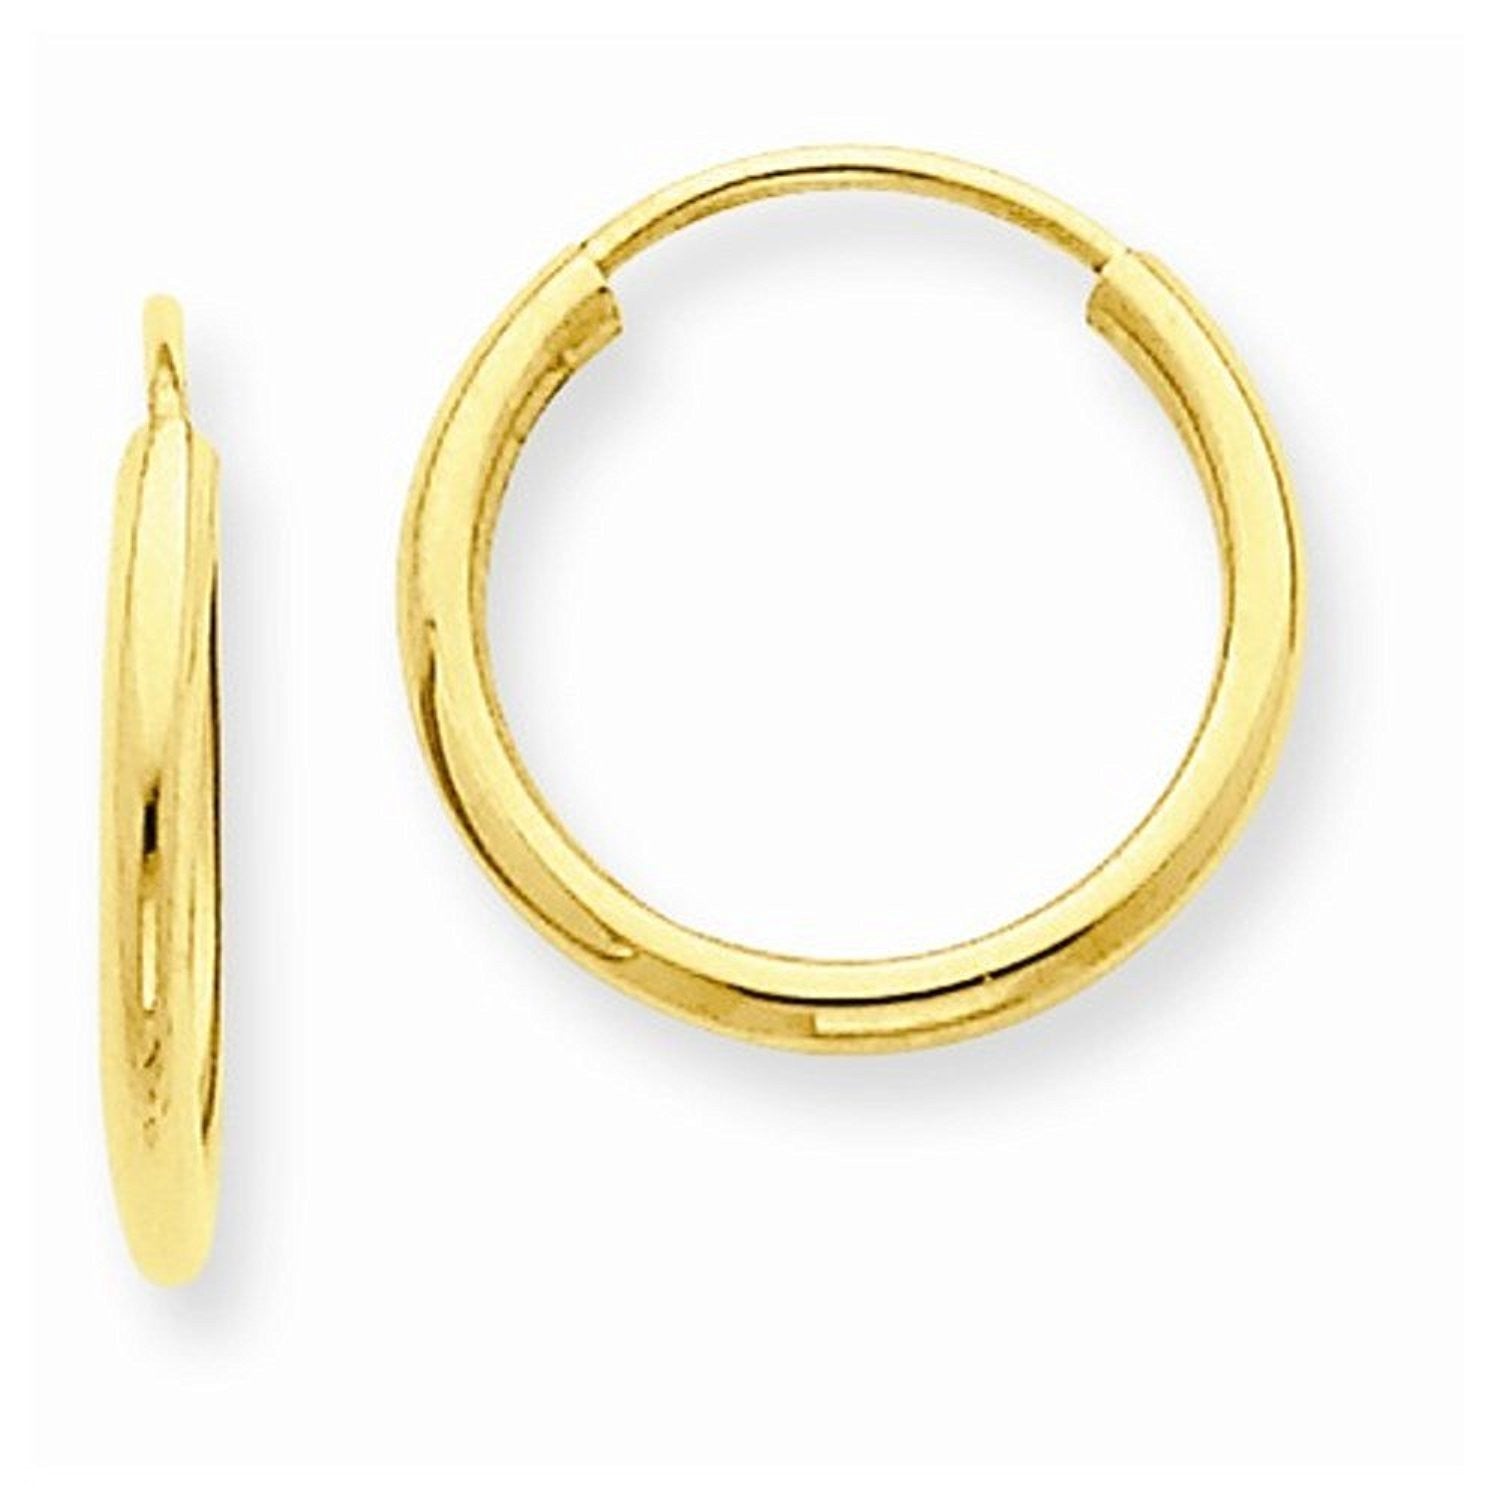 14K Yellow Gold 11mm x 1.5mm Endless Round Hoop Earrings